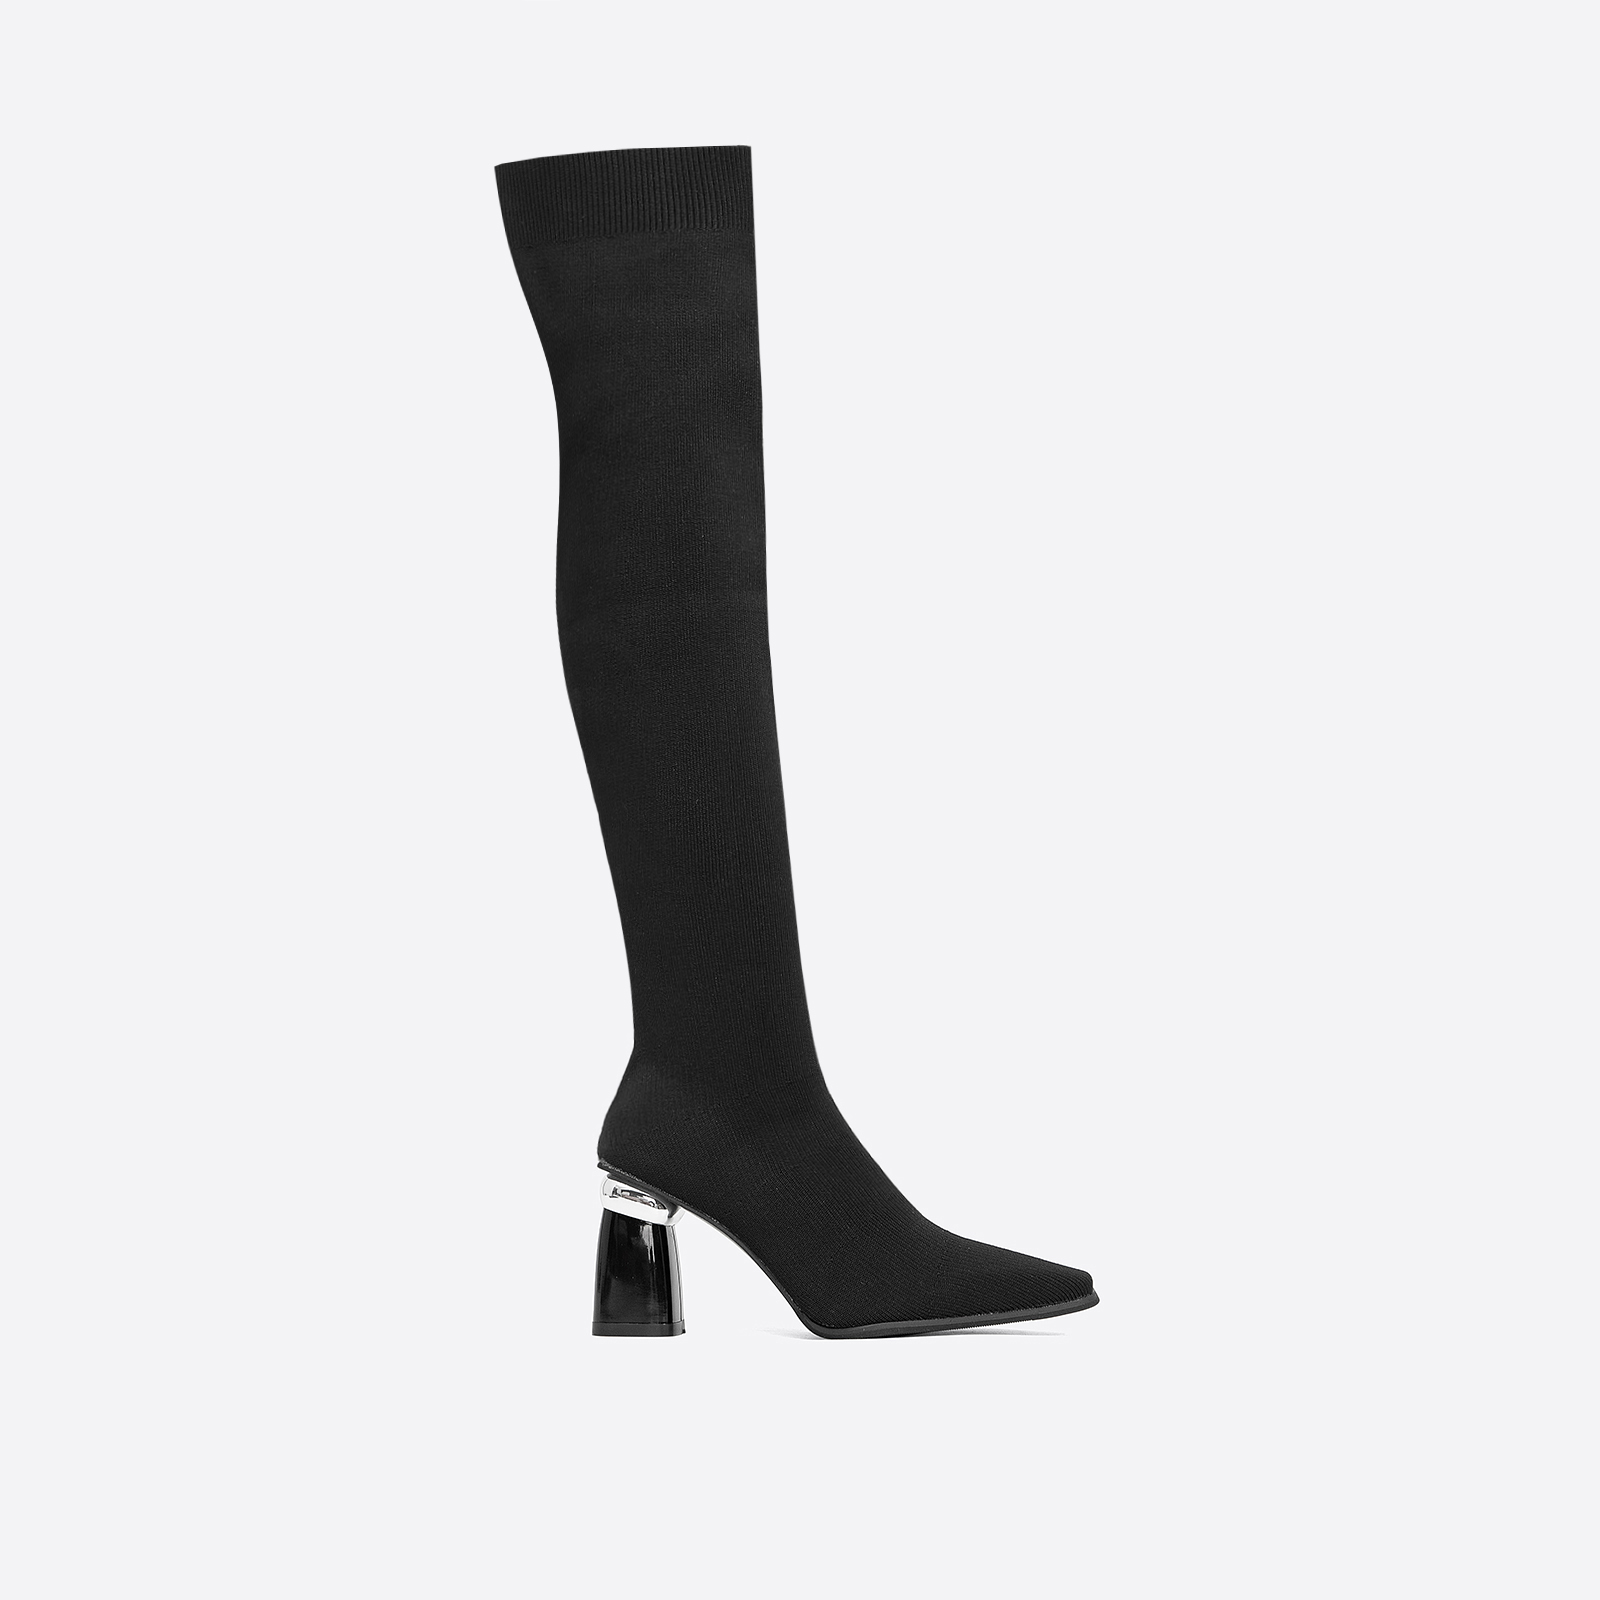 Mousse Fit Women Minimalist Over Knee Boots